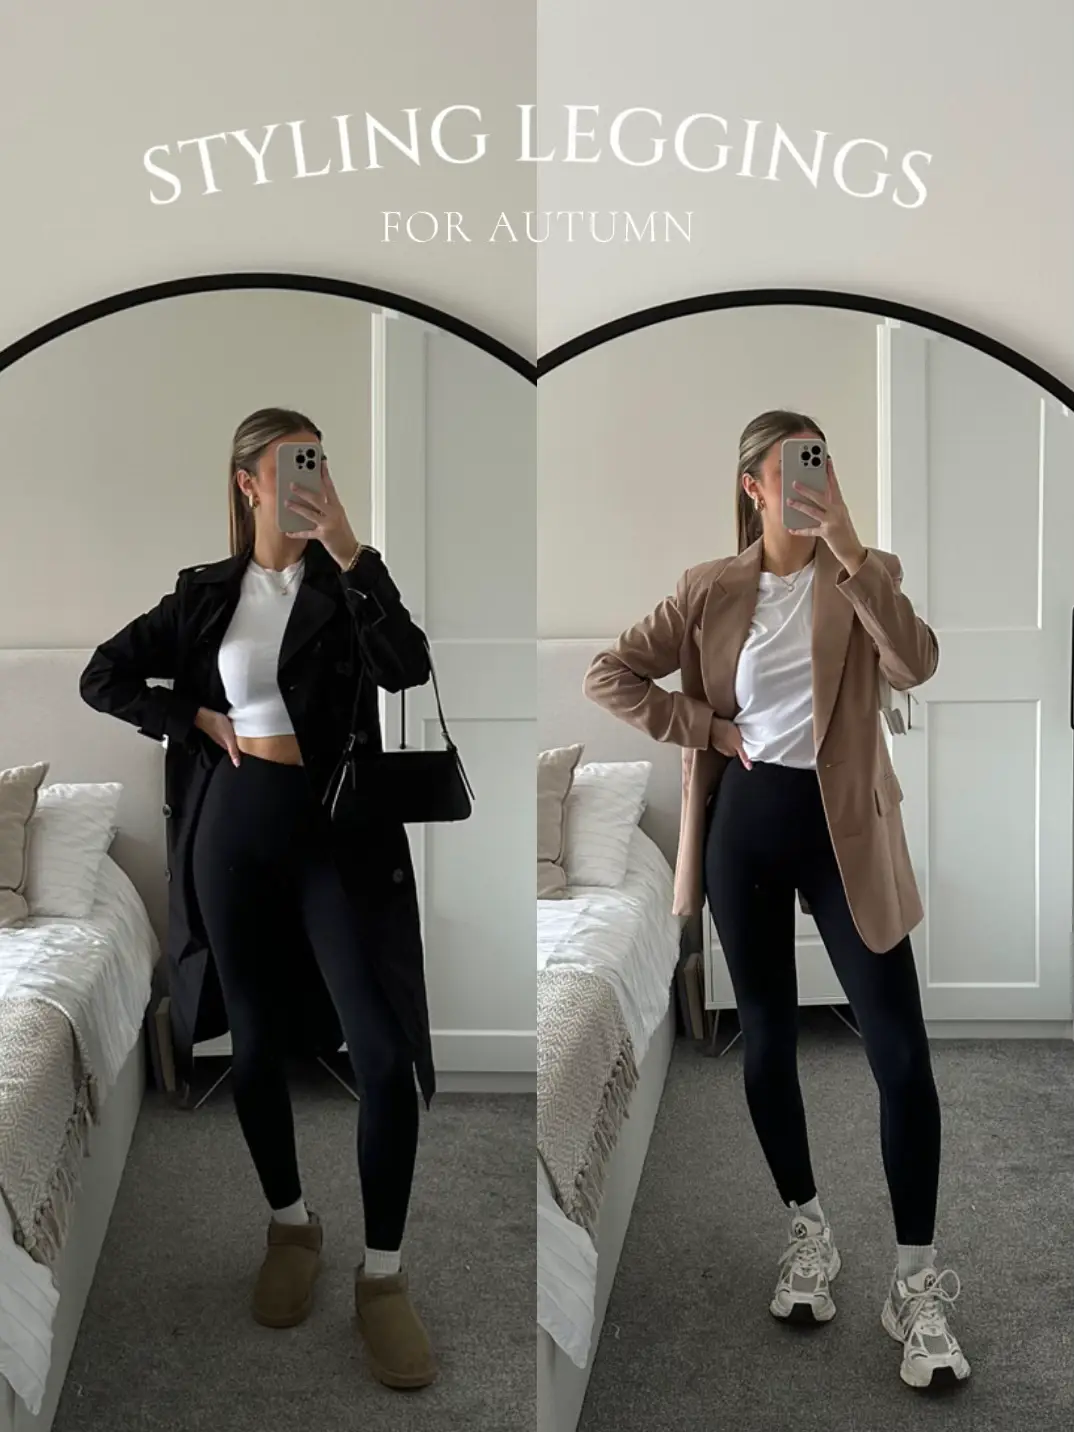 How To Dress Up Leggings And Look Stylish - Christinabtv  Fall trends  outfits, Trendy fall outfits, Leggings outfit fall